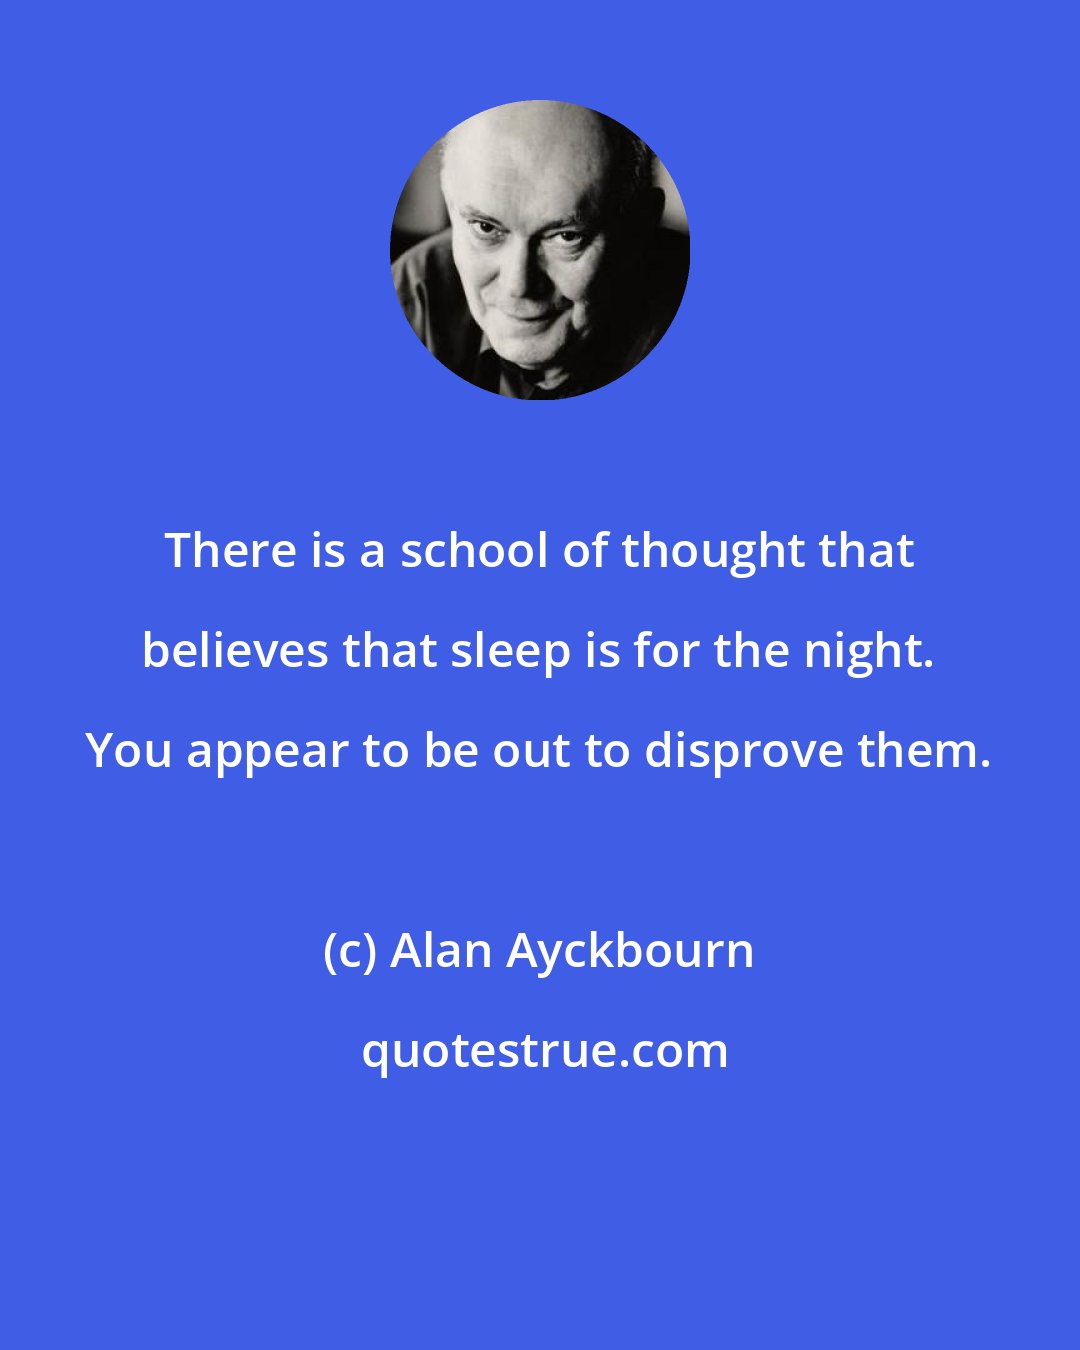 Alan Ayckbourn: There is a school of thought that believes that sleep is for the night. You appear to be out to disprove them.